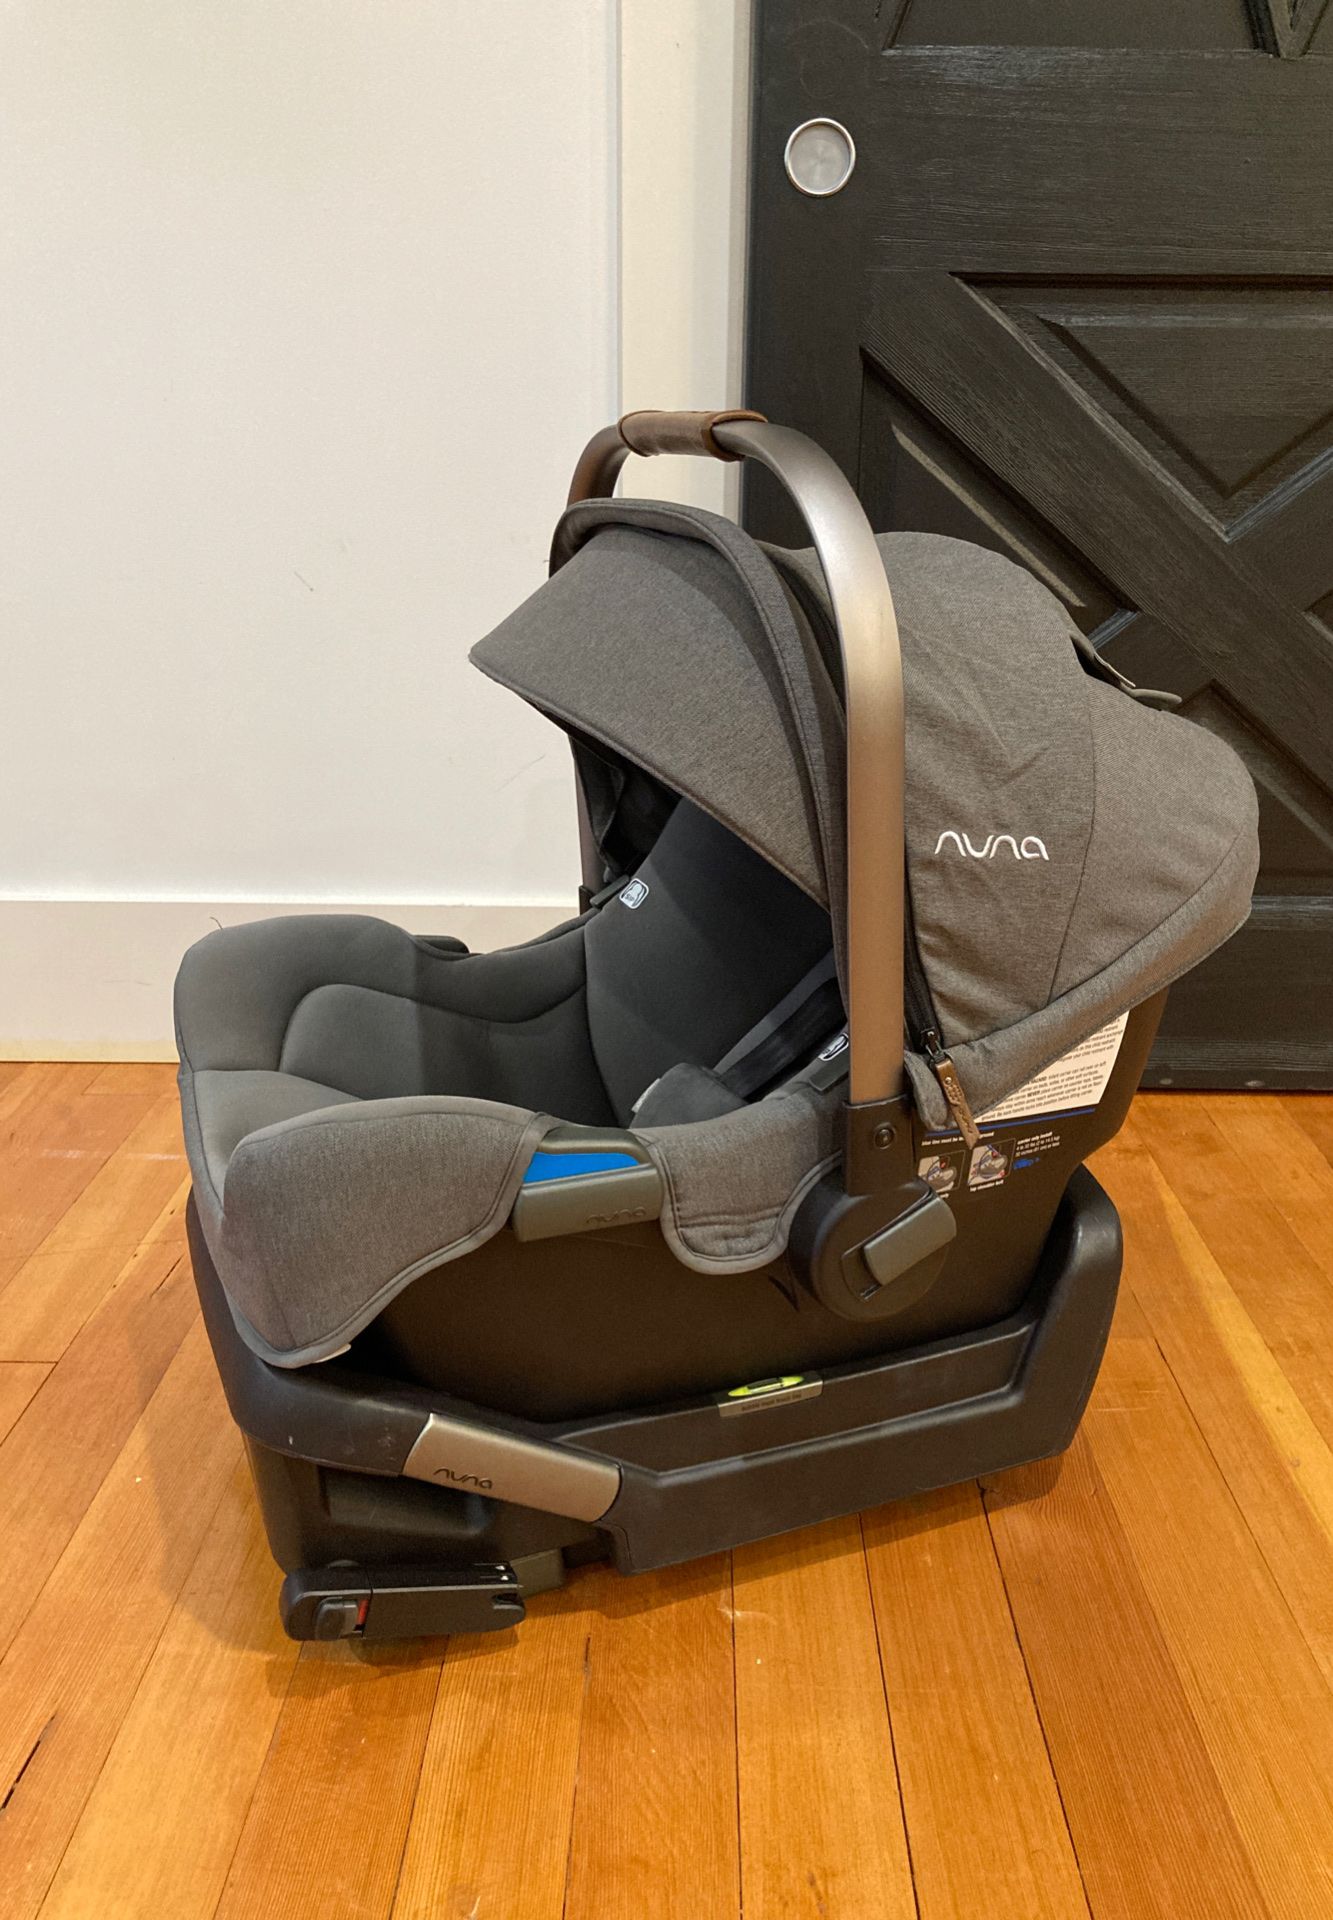 2019 Nuna Pipa Car seat used only 4 months!